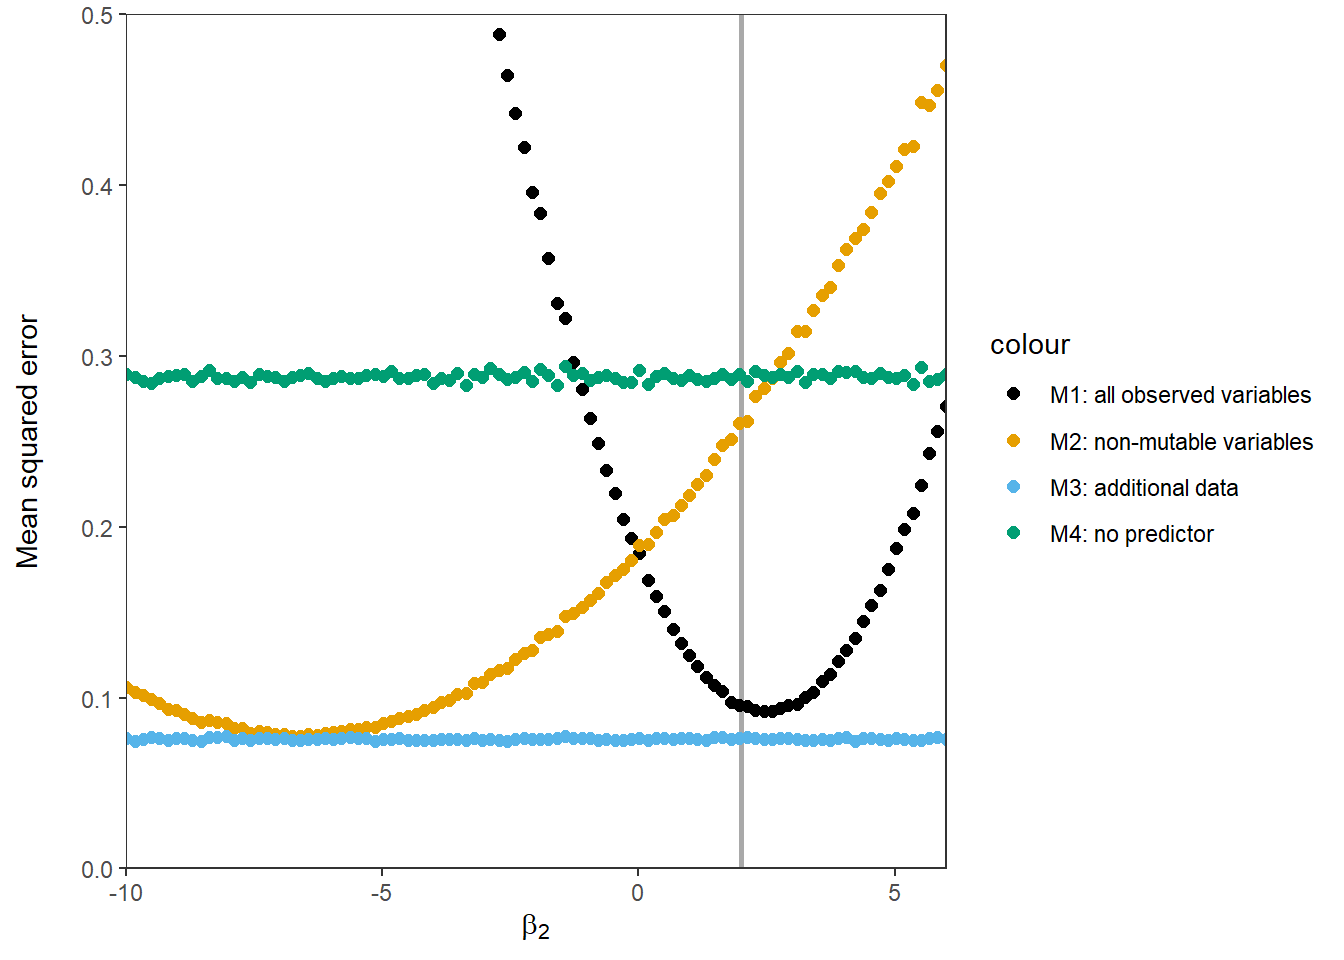 Mean squared error of all models across a range of test environments that differ in the coefficient for the relationship D -> A. The vertical grey line indicates the training environment.